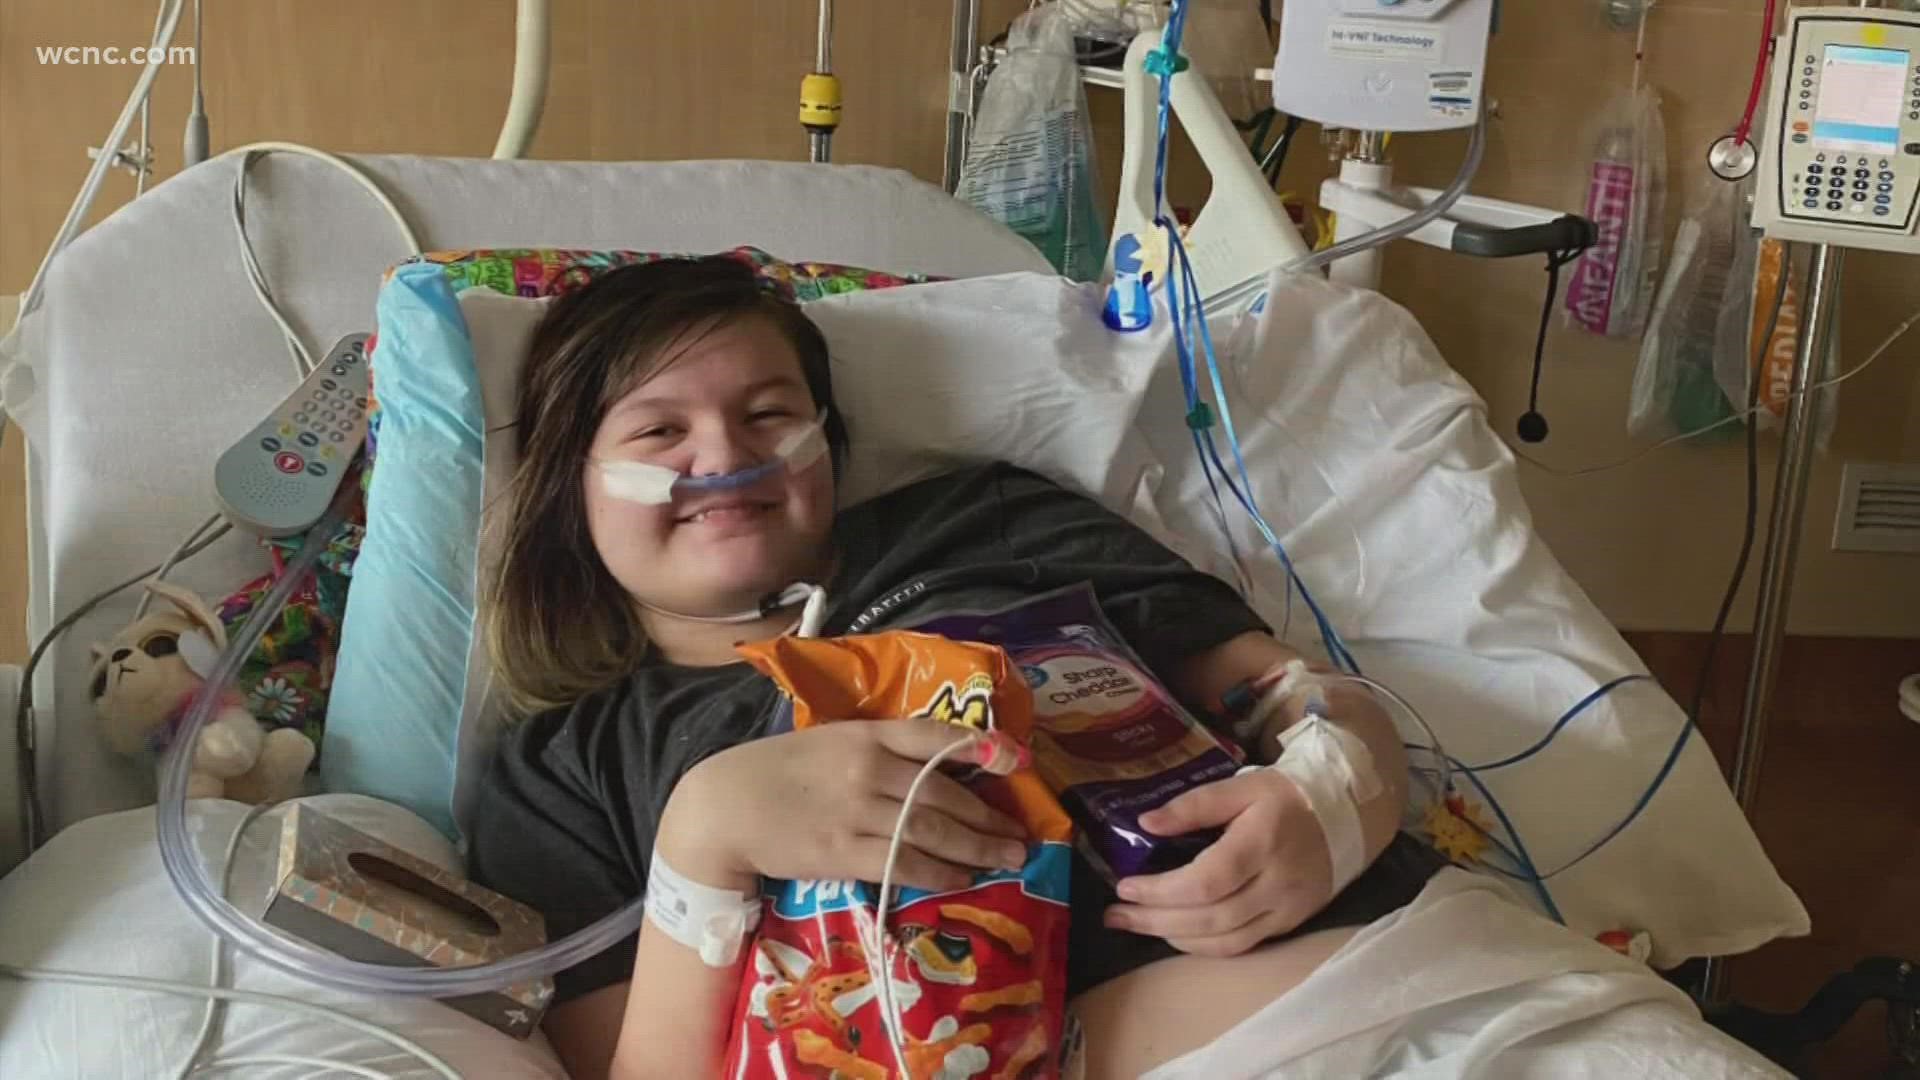 Caldwell County teenager Zoey Taylor is now on the road to recovery after catching COVID-19 with symptoms so severe she had to be airlifted and placed on oxygen.